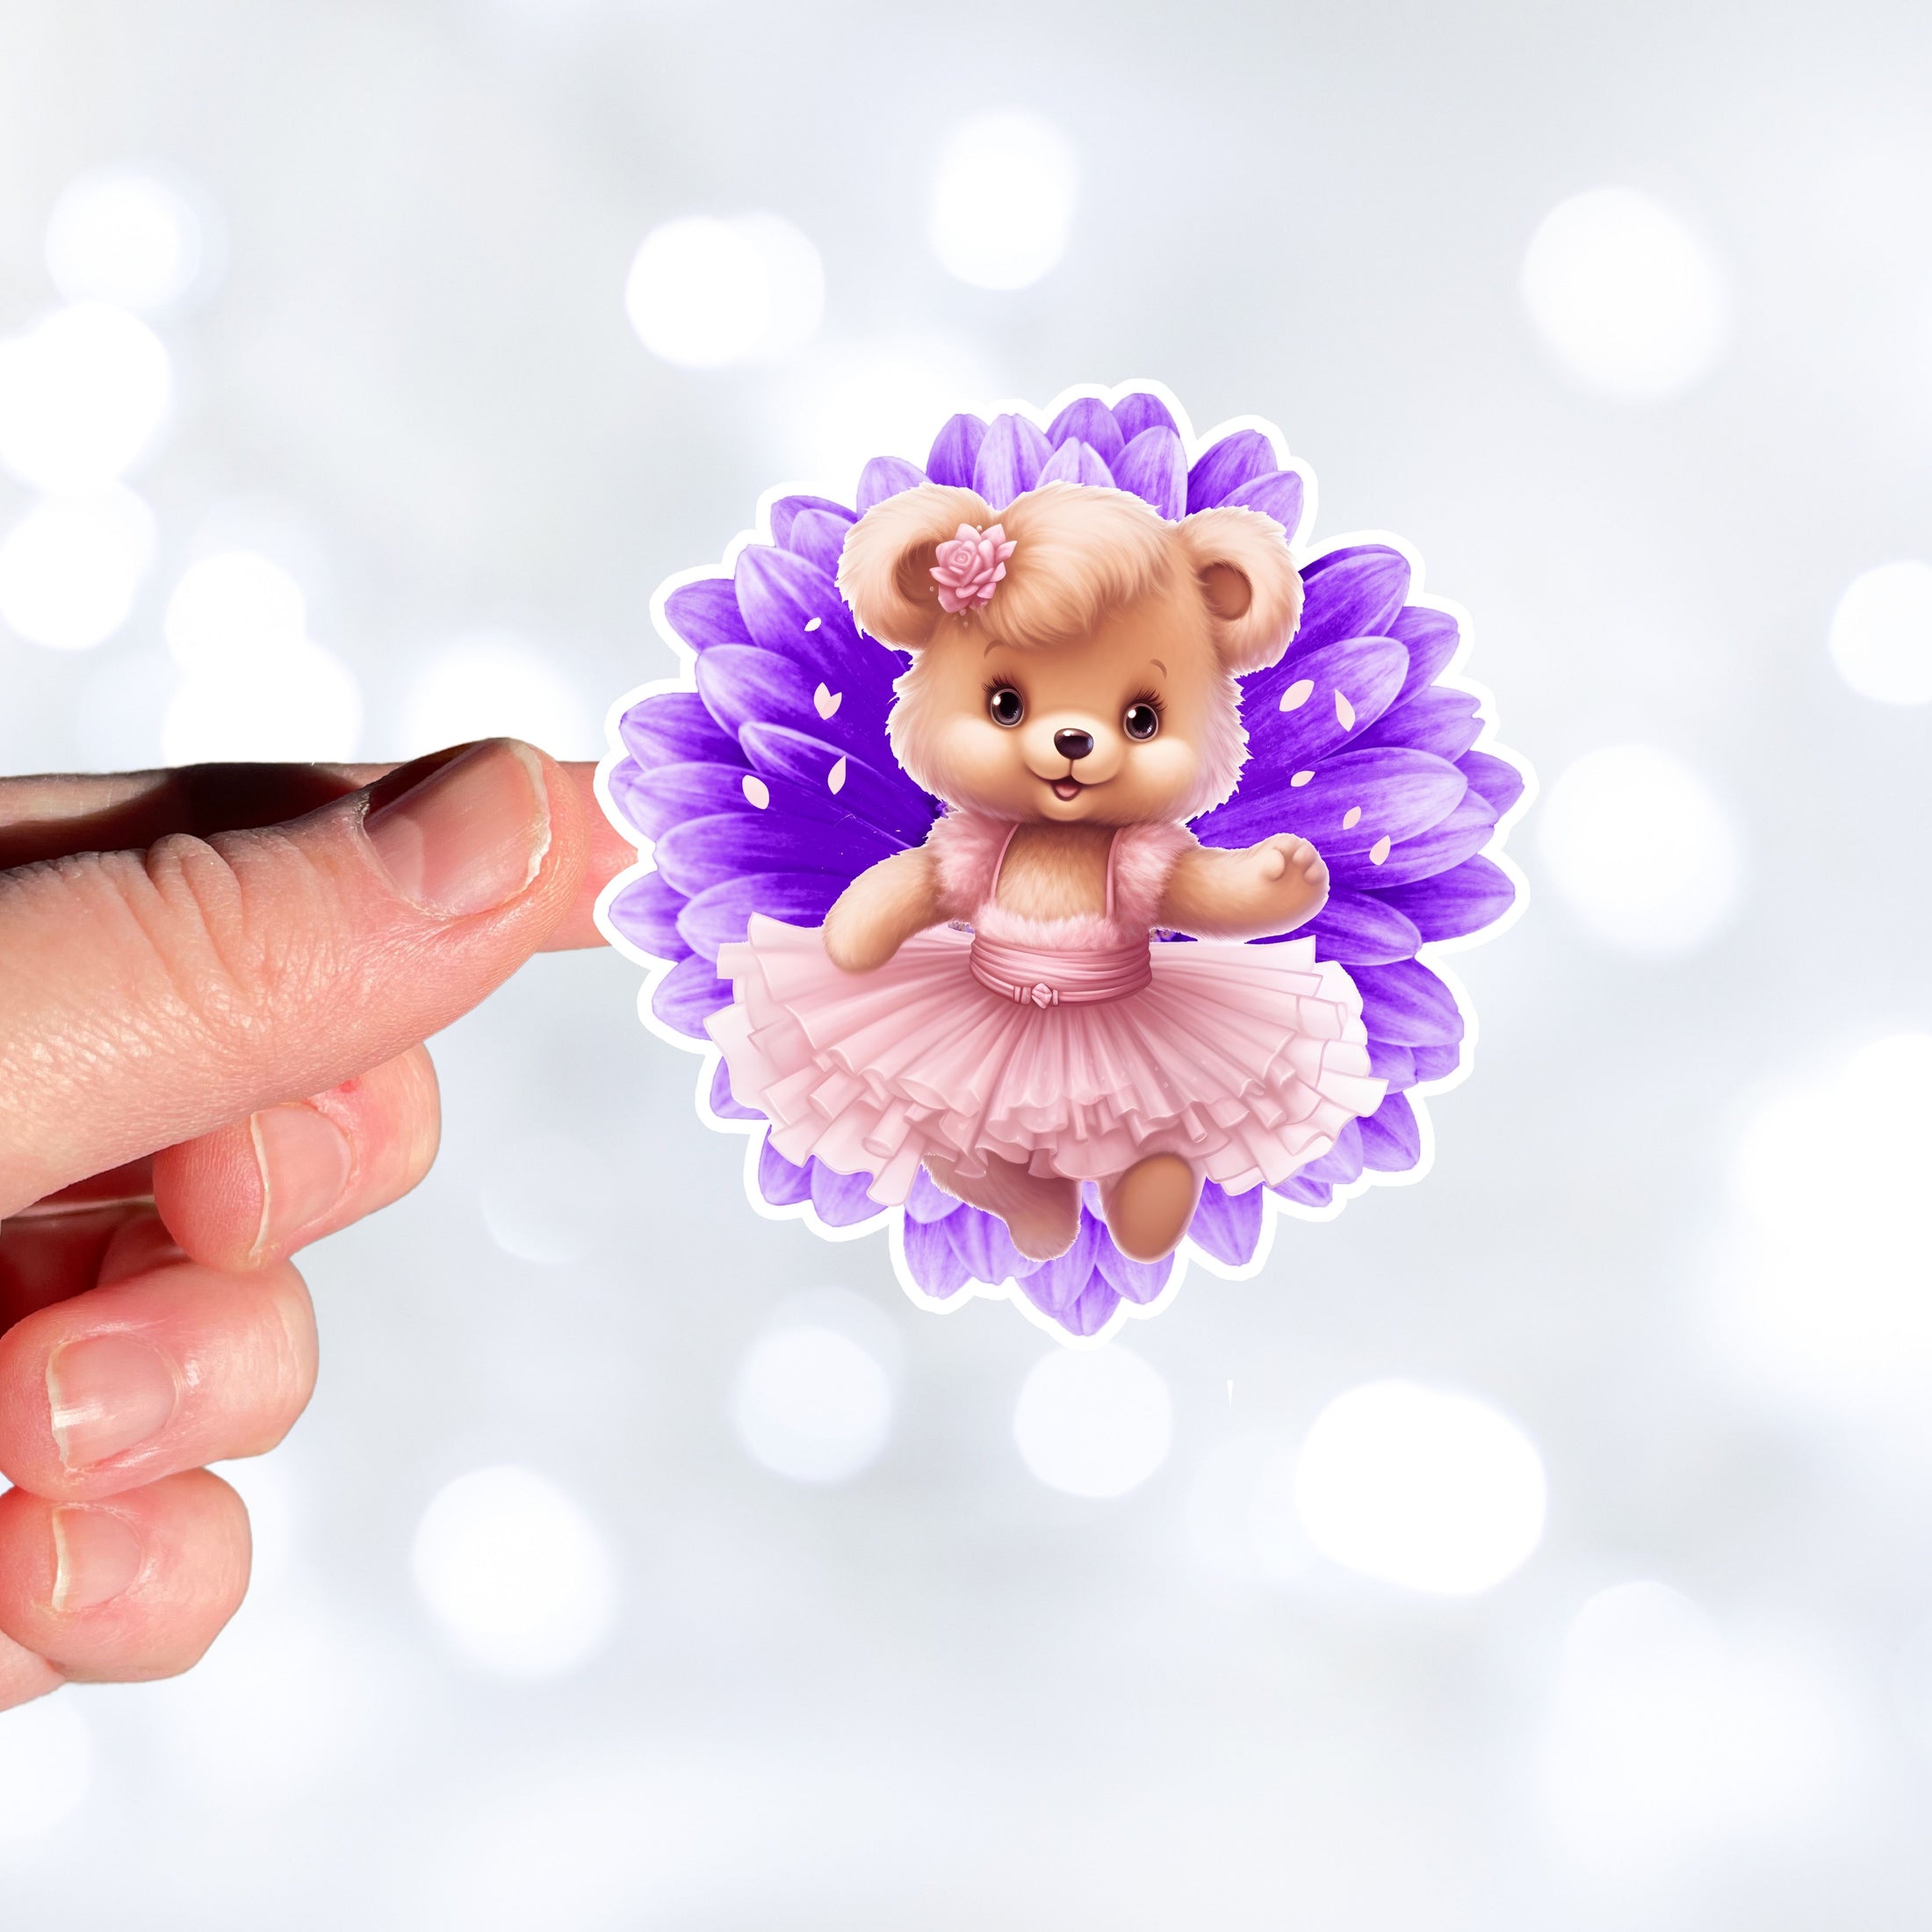 This image shows a hand holding the teddy bear on purple sticker.